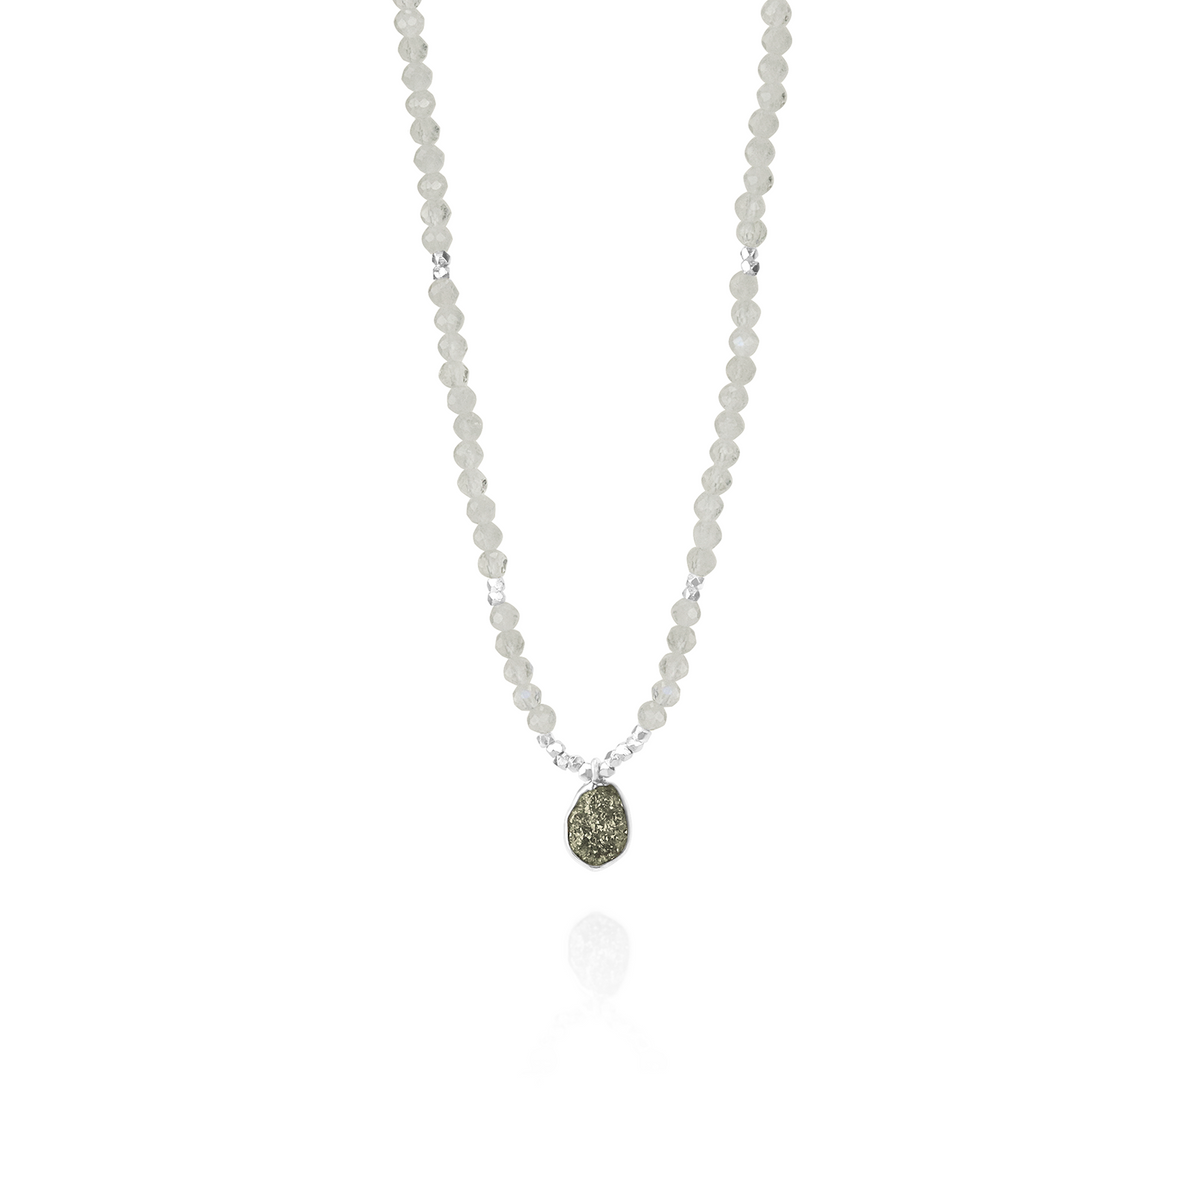 Rough Diamond & Faceted Moonstone Necklace